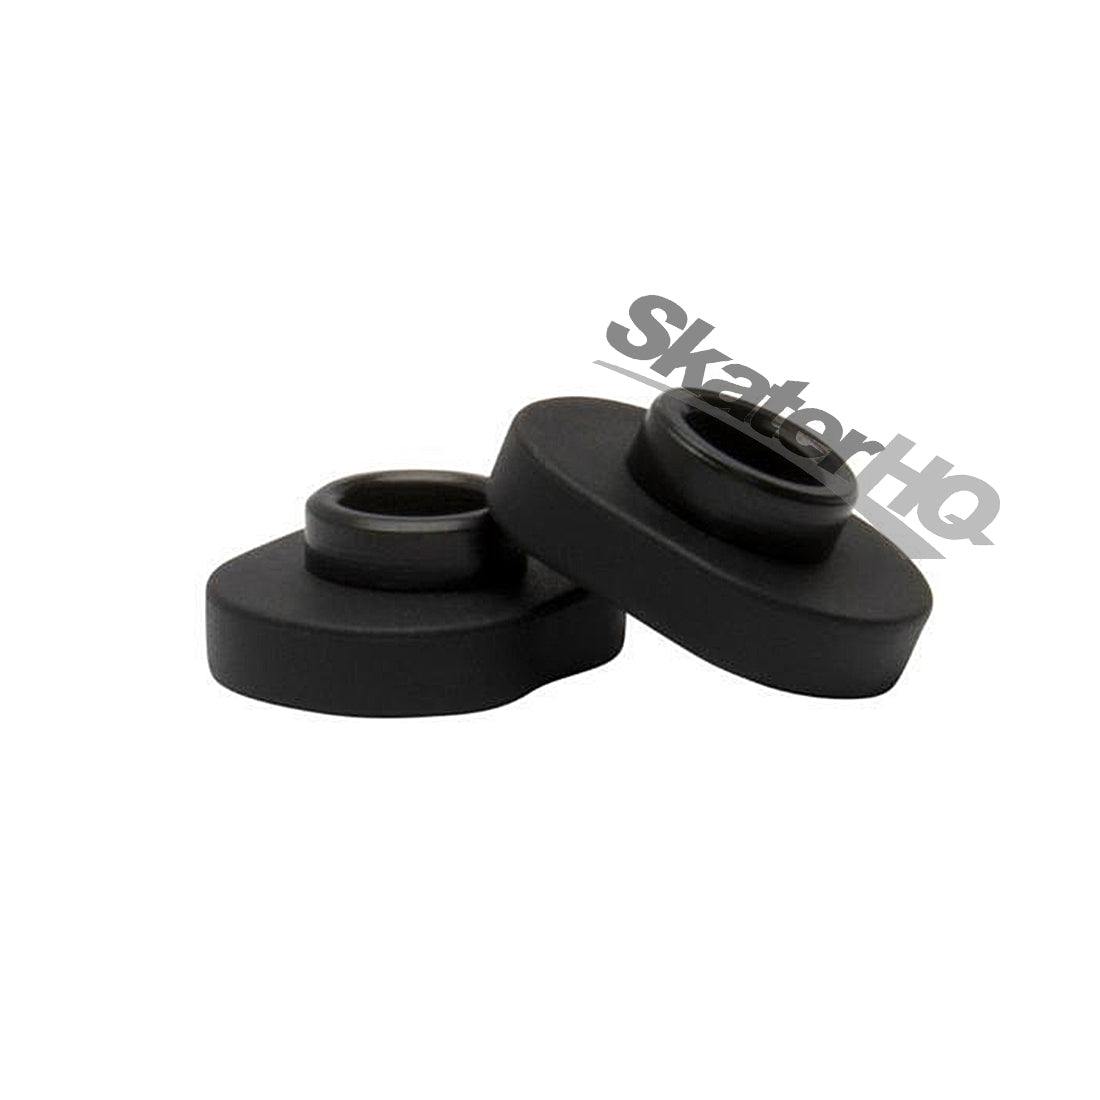 Envy 24mm Rear Wheel Spacers - Pair Scooter Hardware and Parts